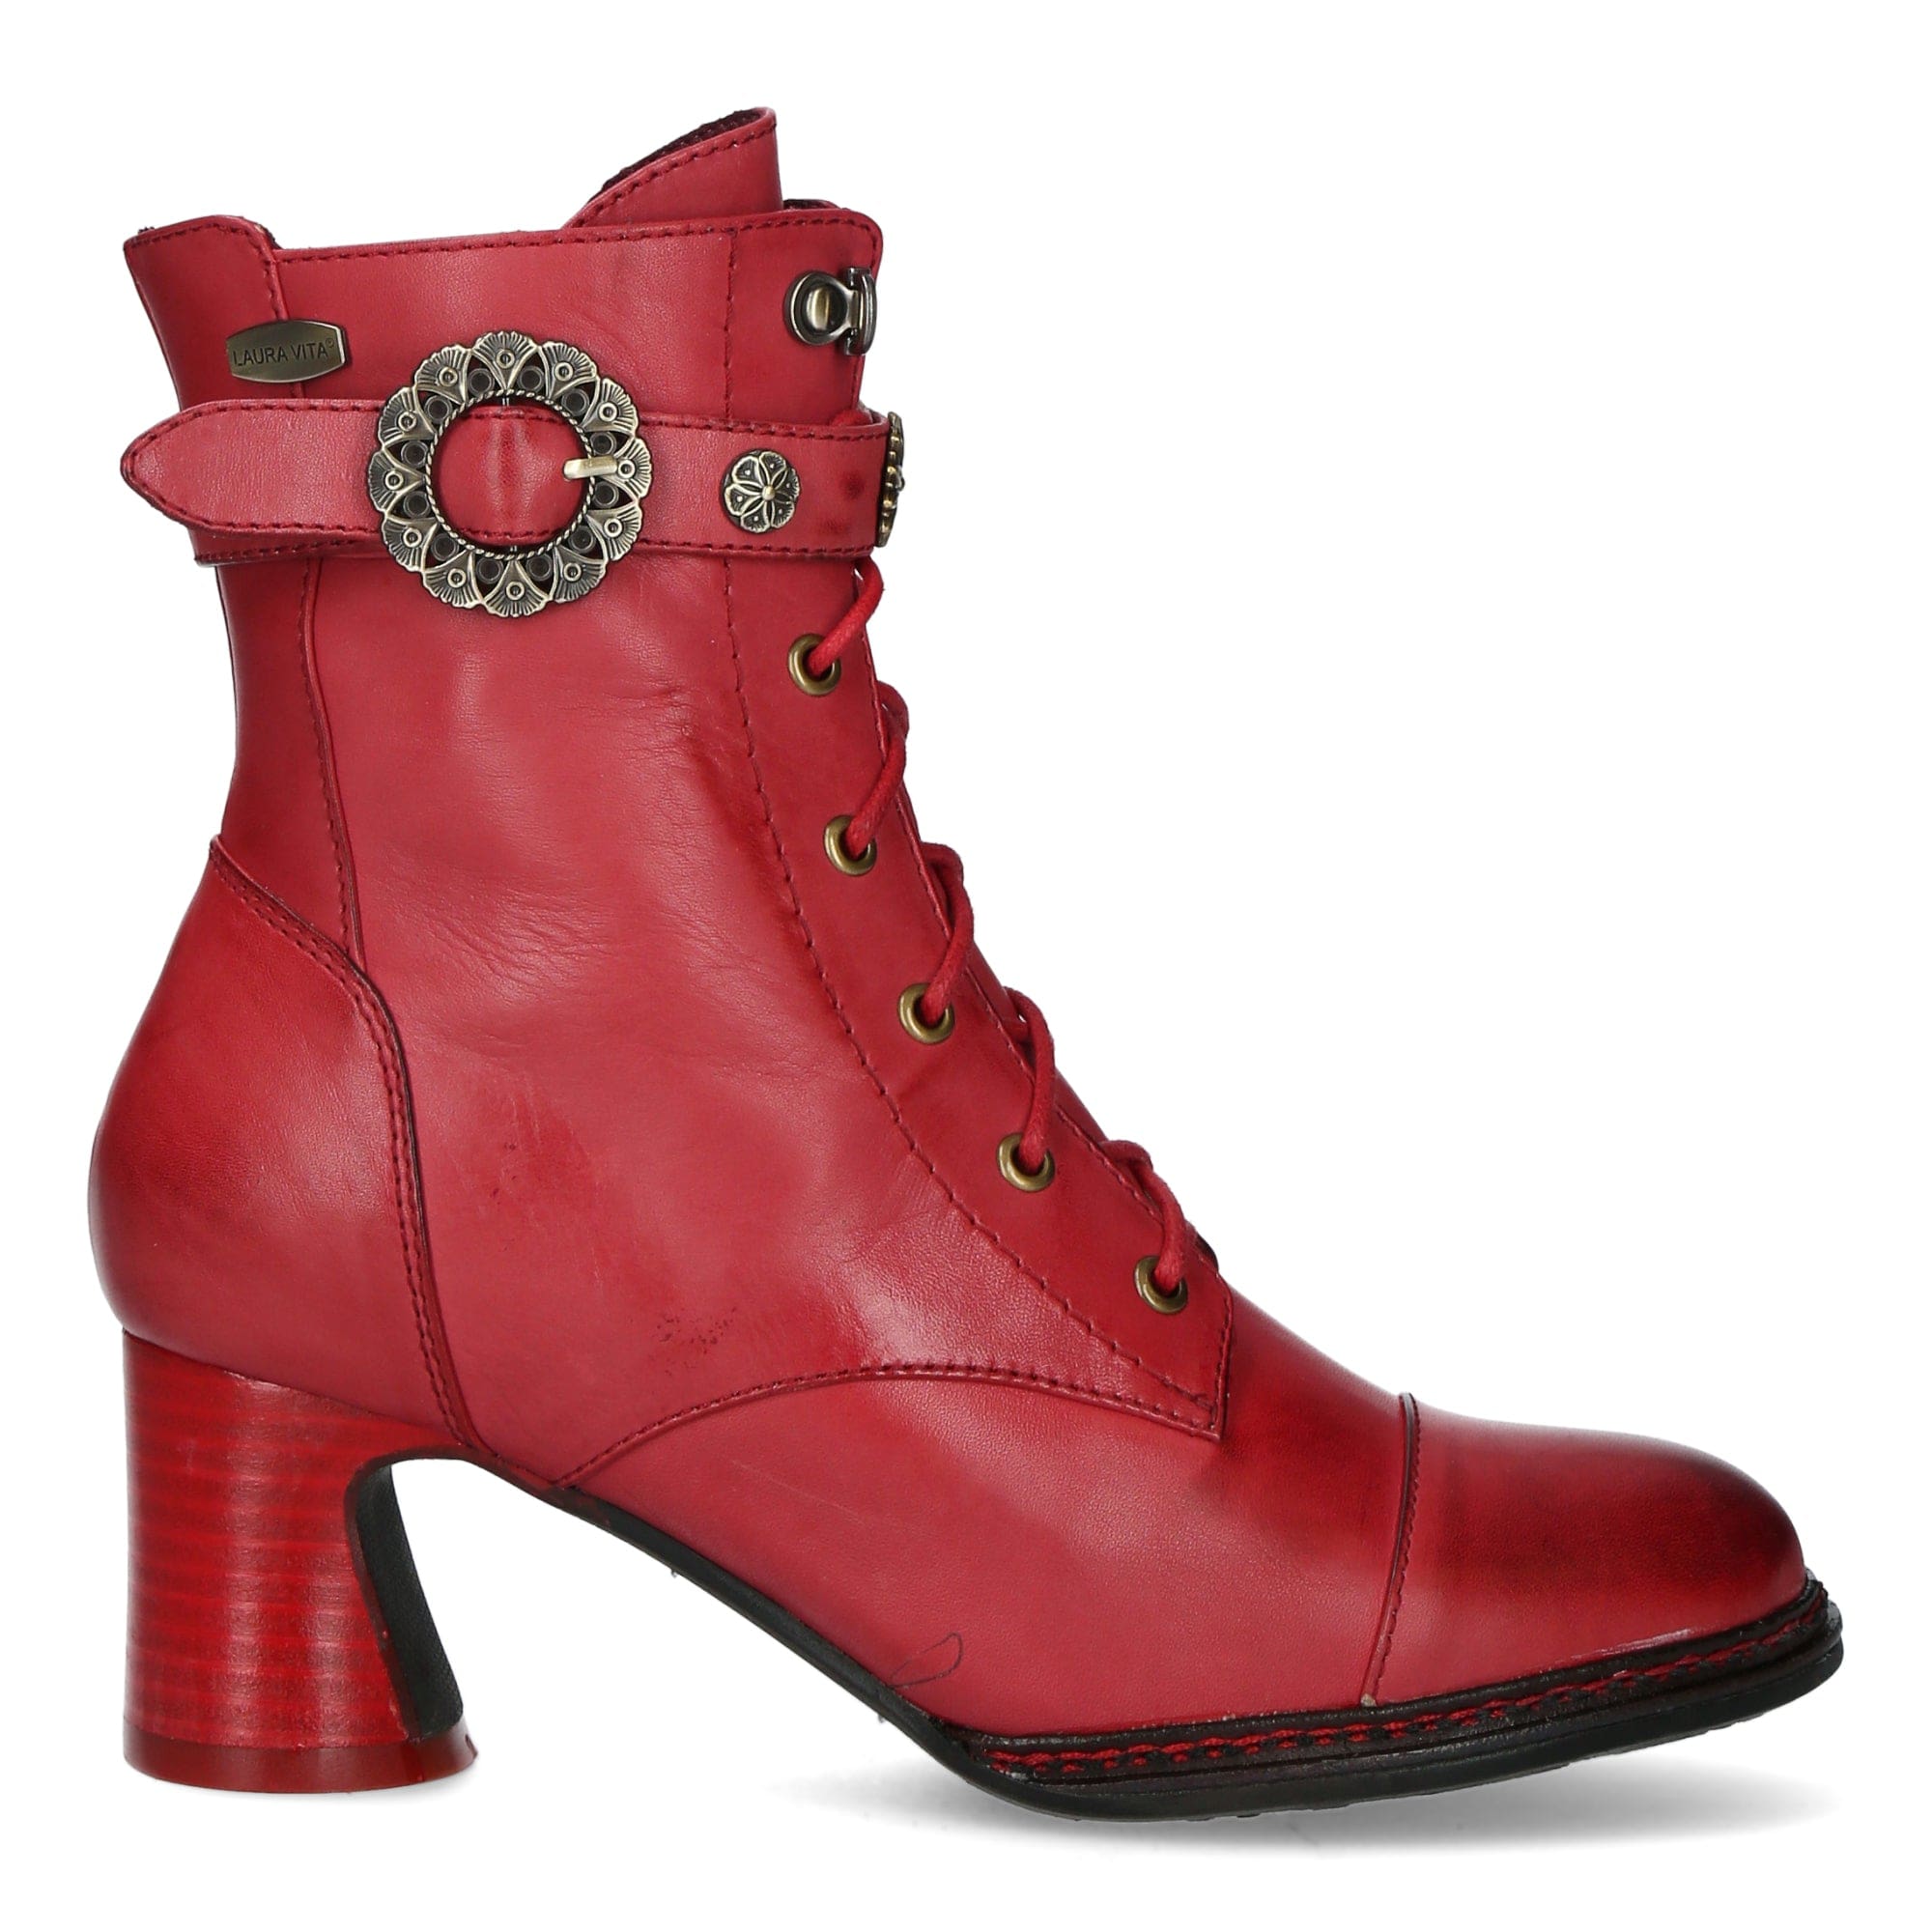 INCAO 07A - 36 / Red - Boots